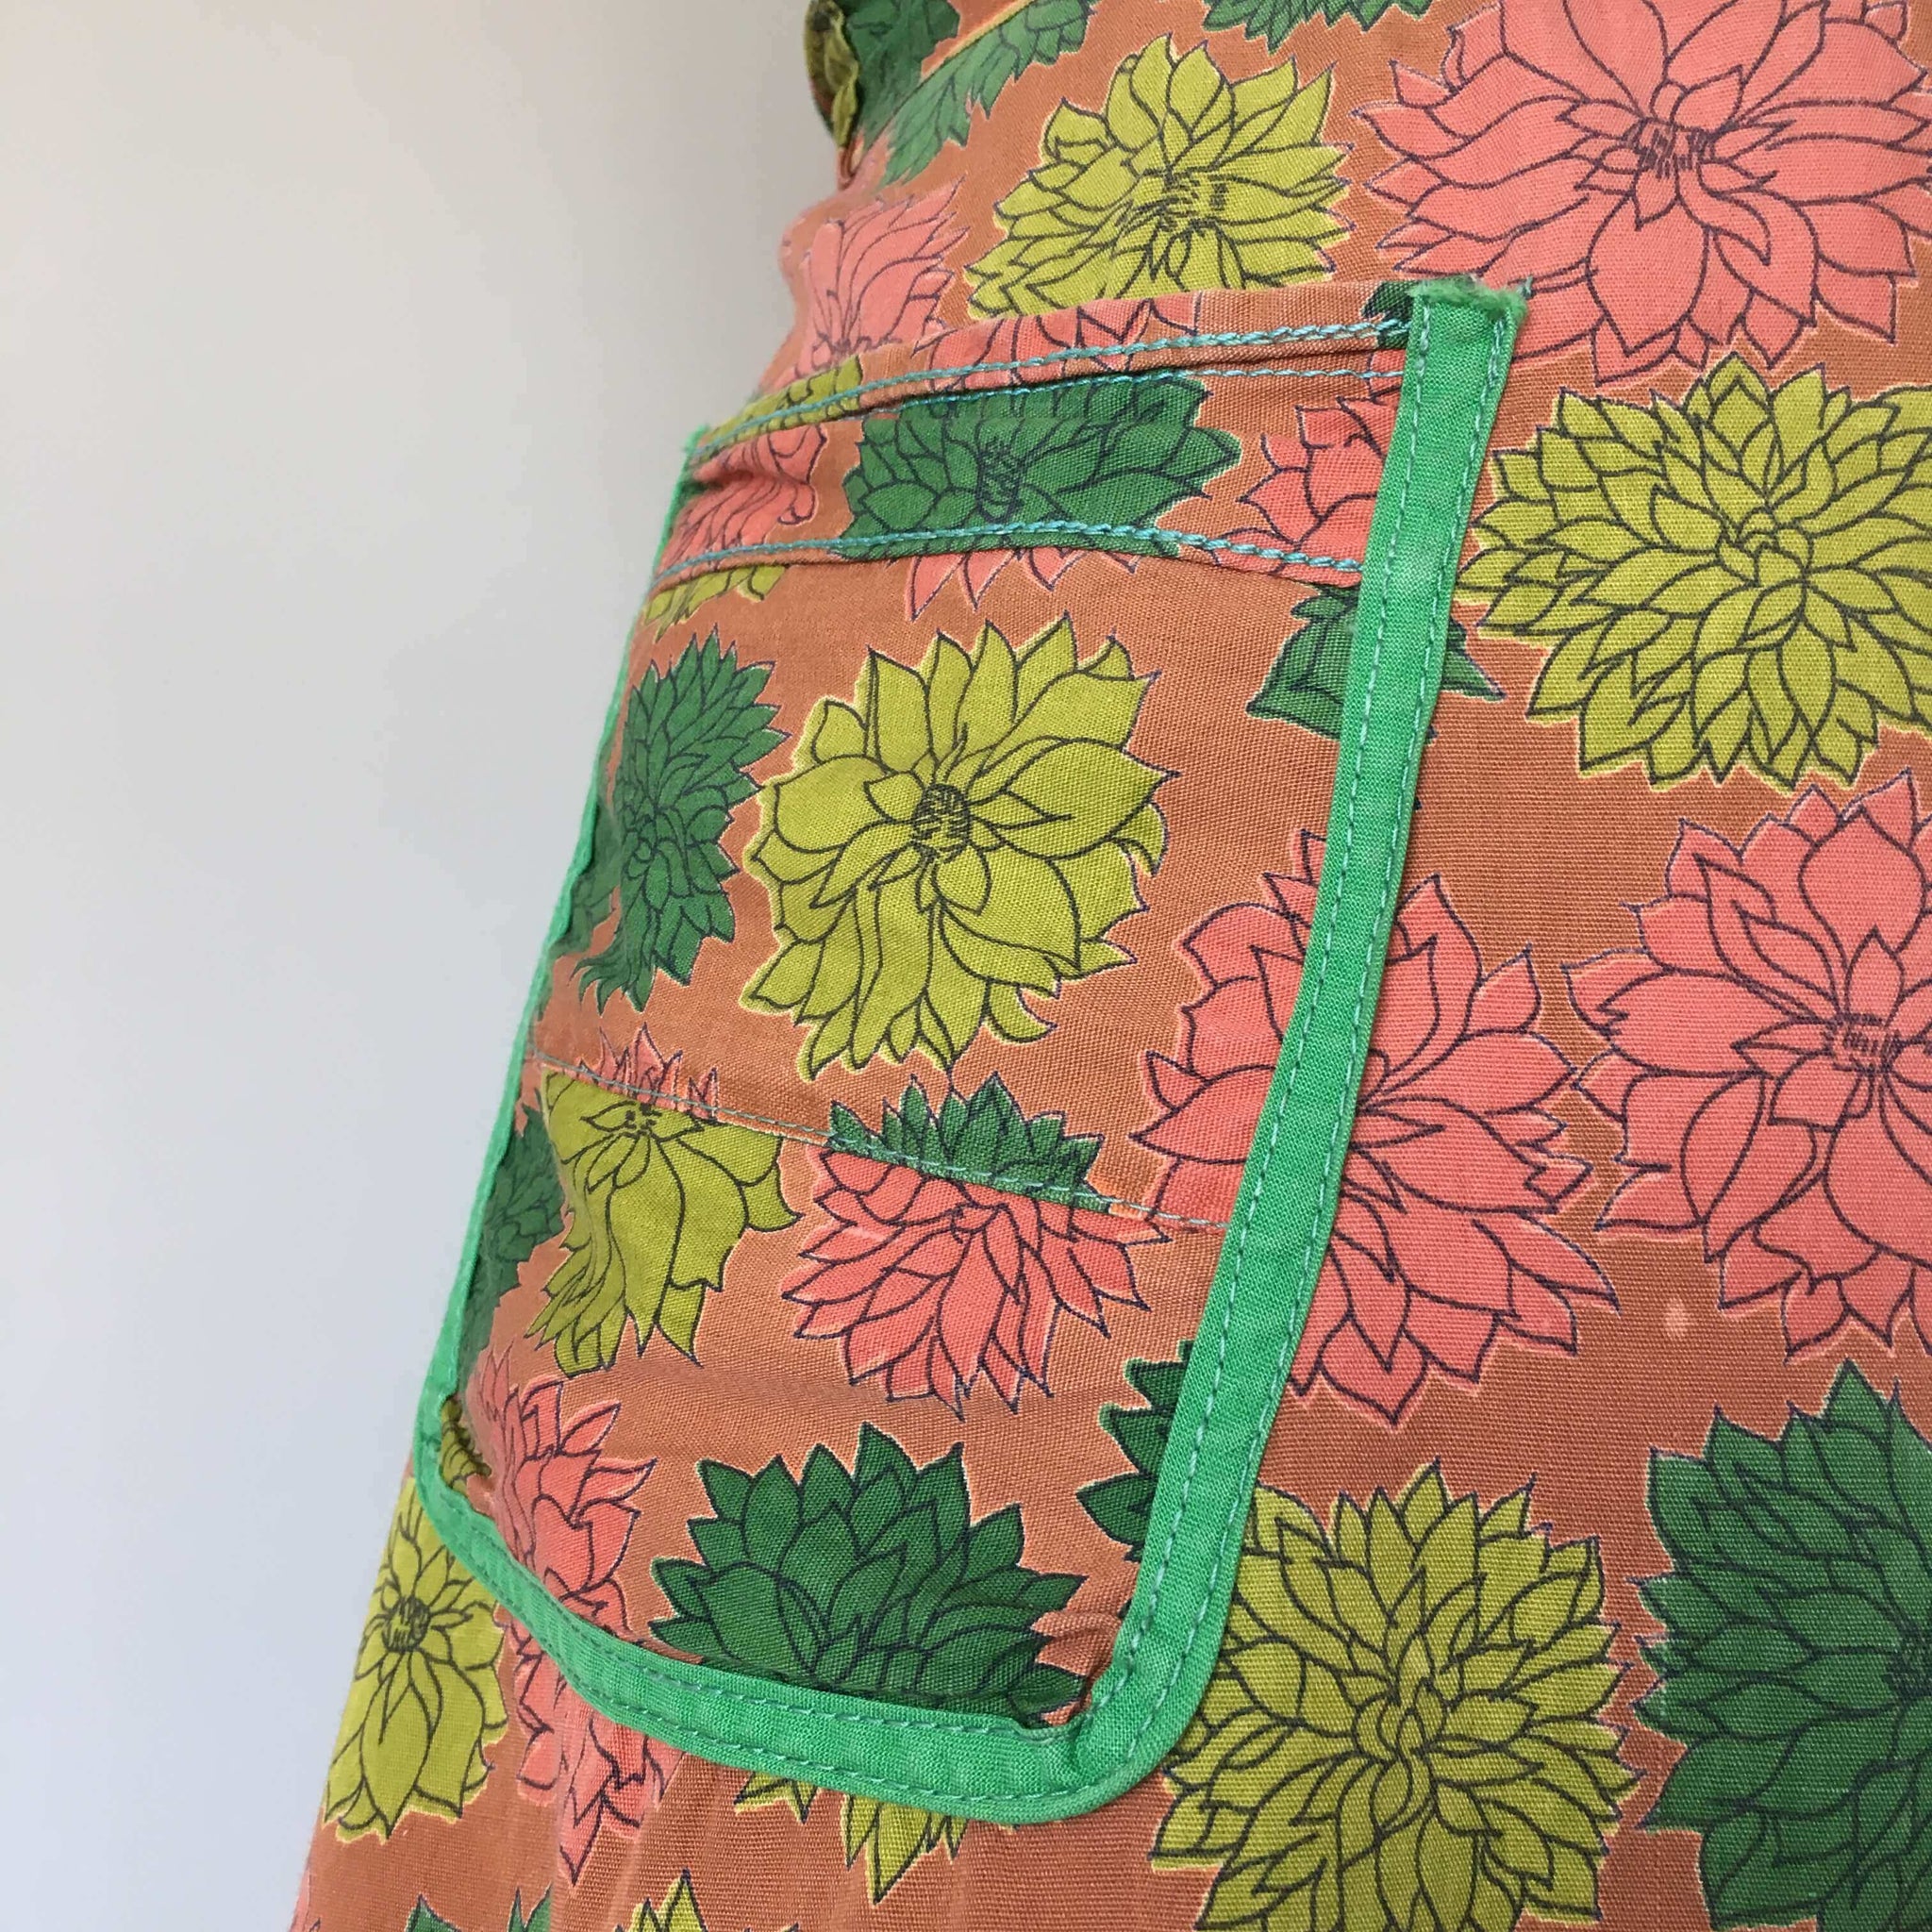 Vintage Brown and Green Floral Half Apron - Dahlia Flower Succulent Style Pattern